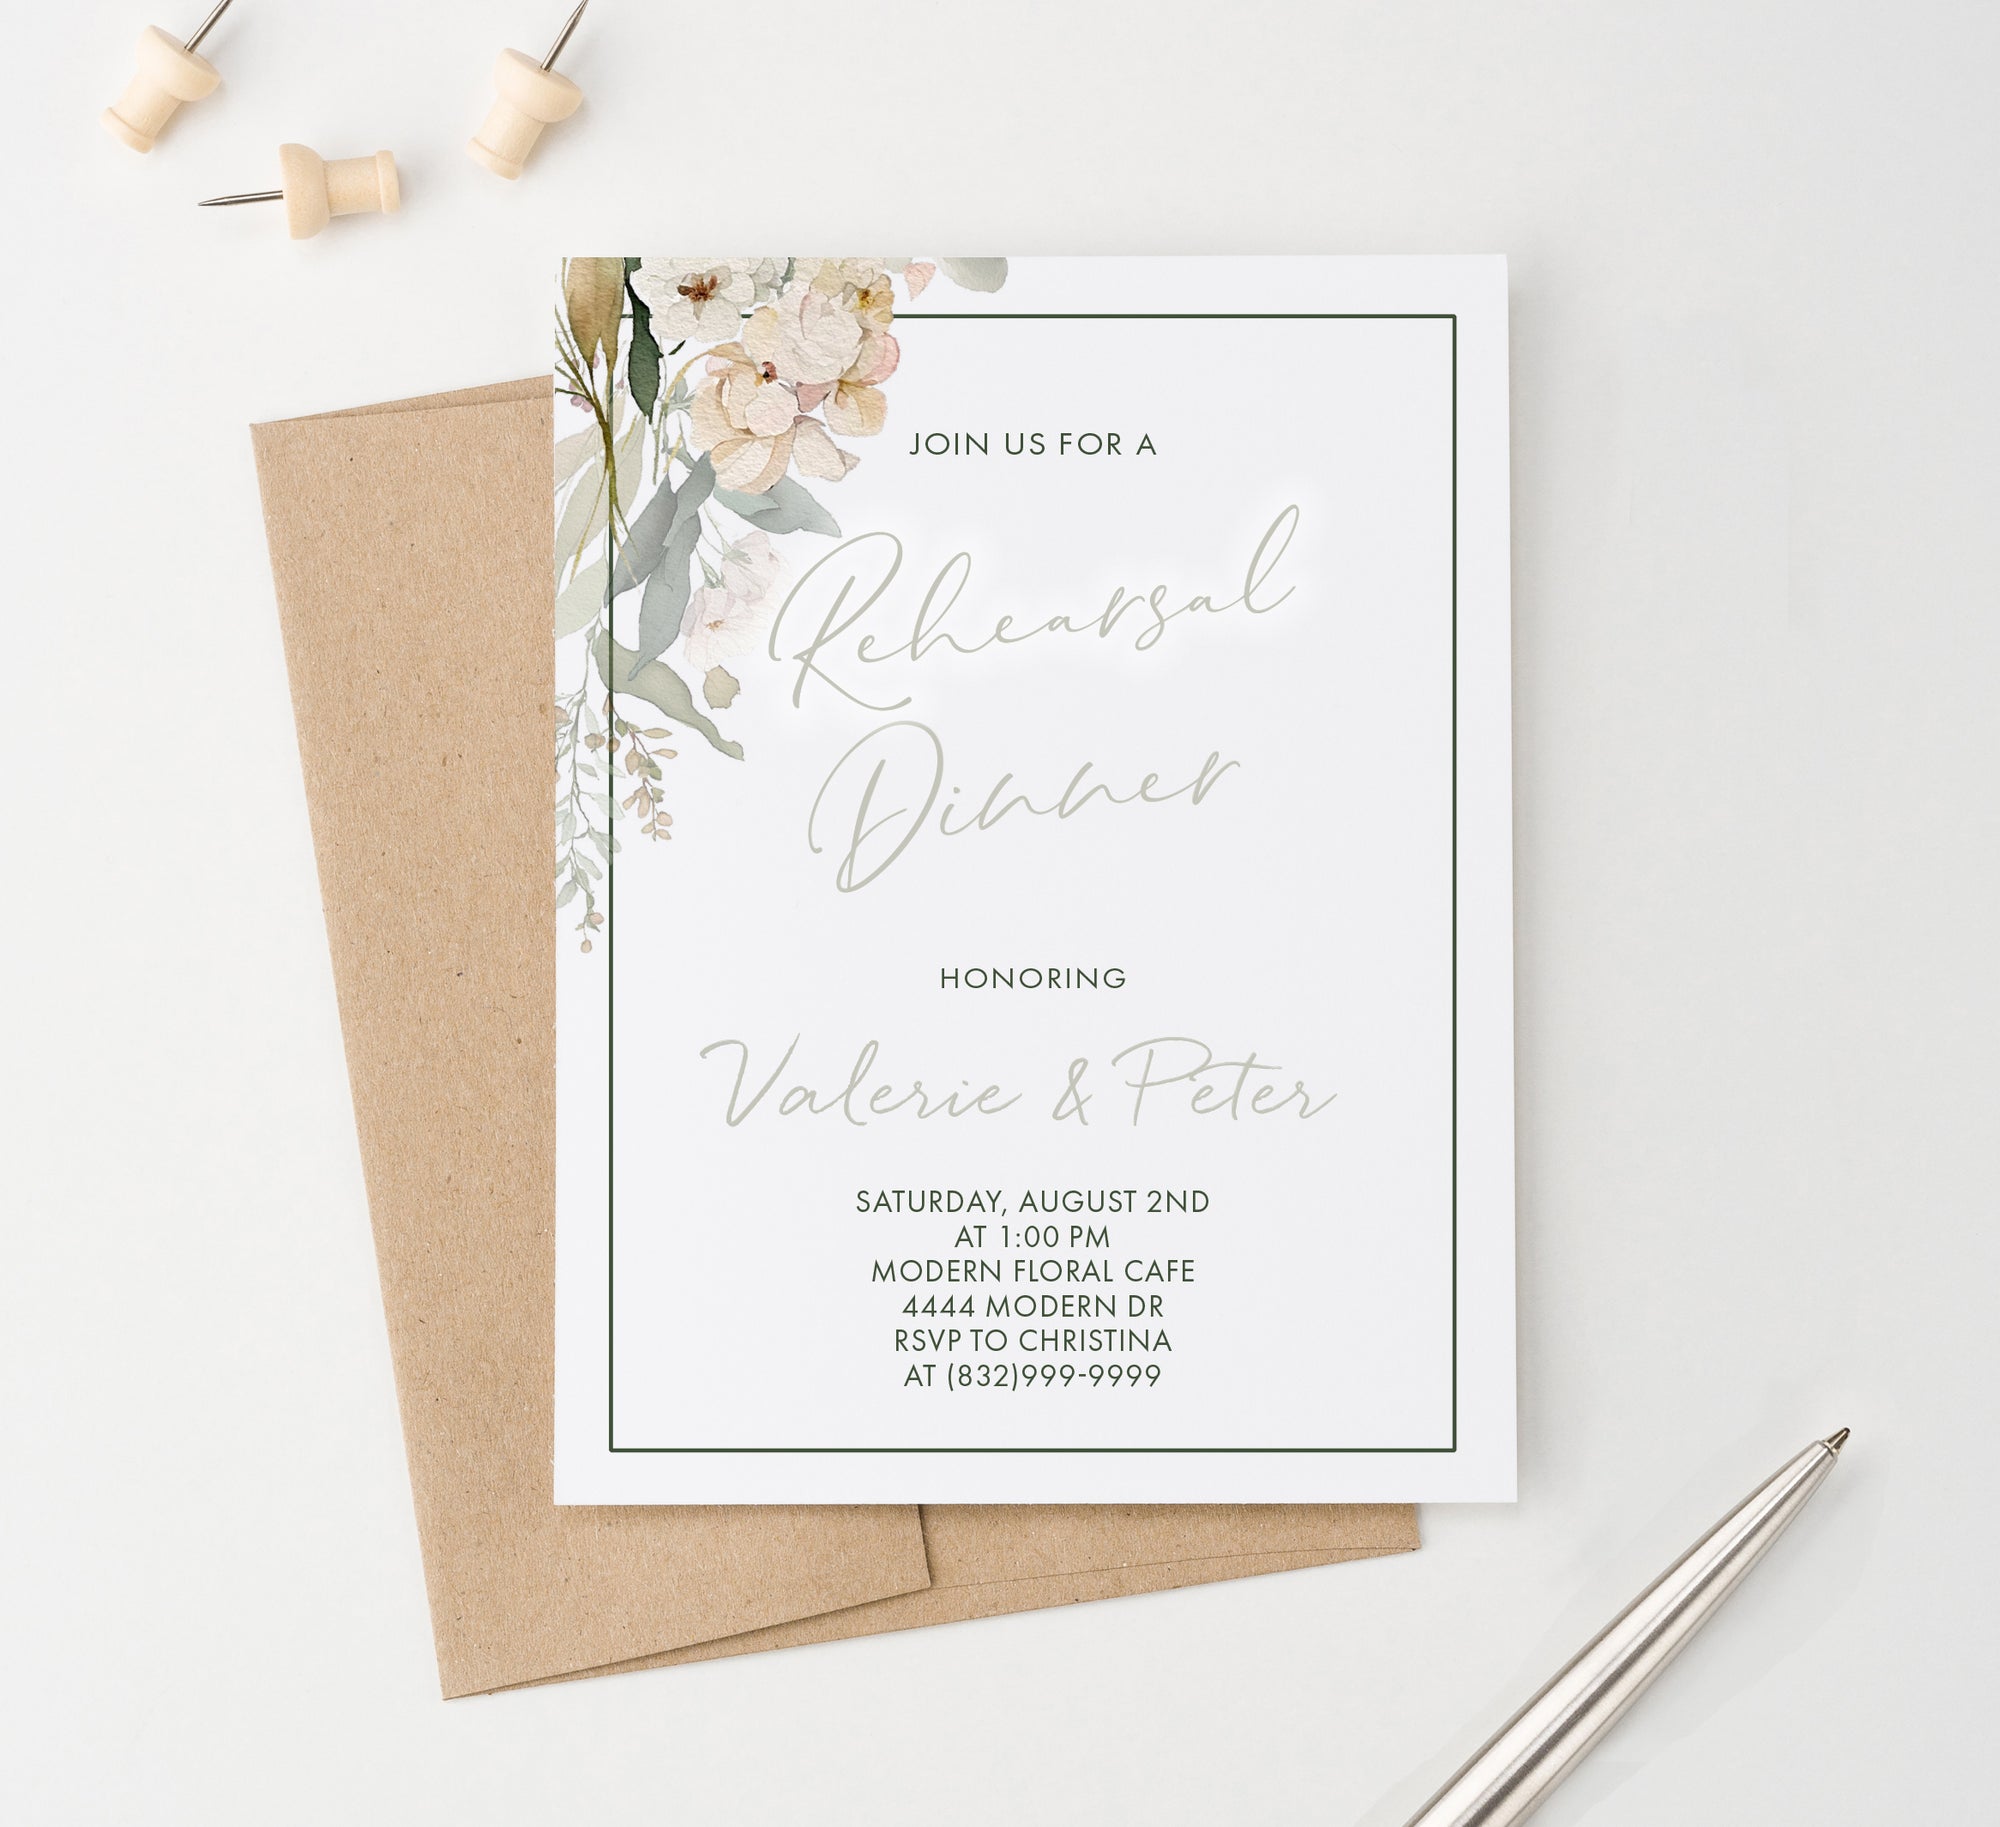 Classy Rehearsal Dinner Invitations With Florals